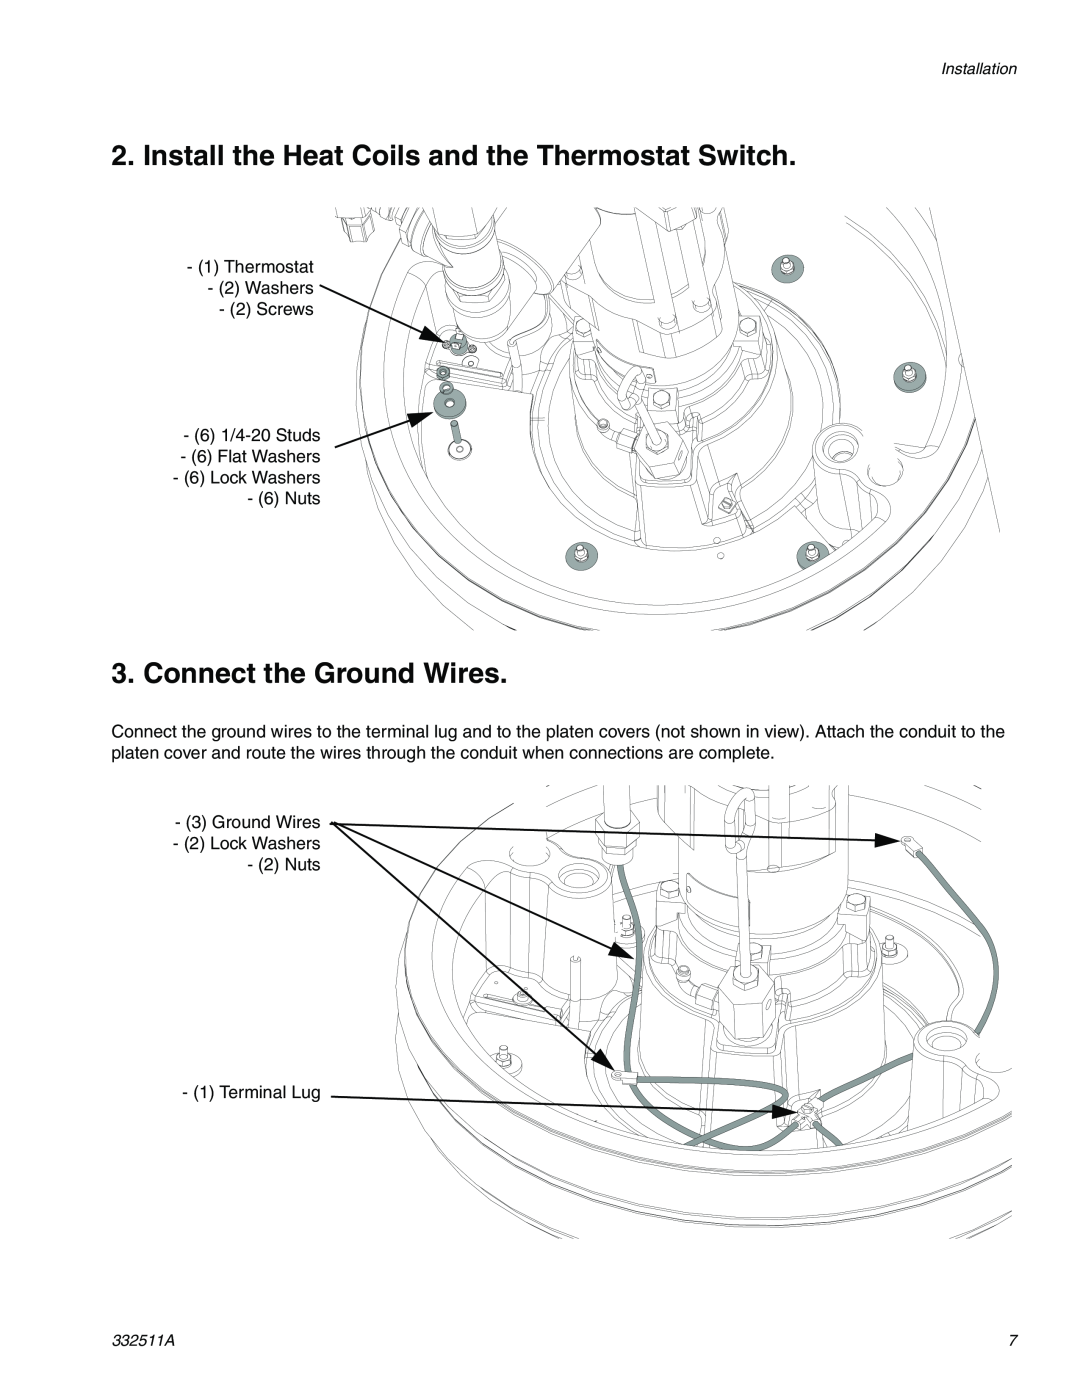 Graco 24R200 operation manual Connect the Ground Wires 